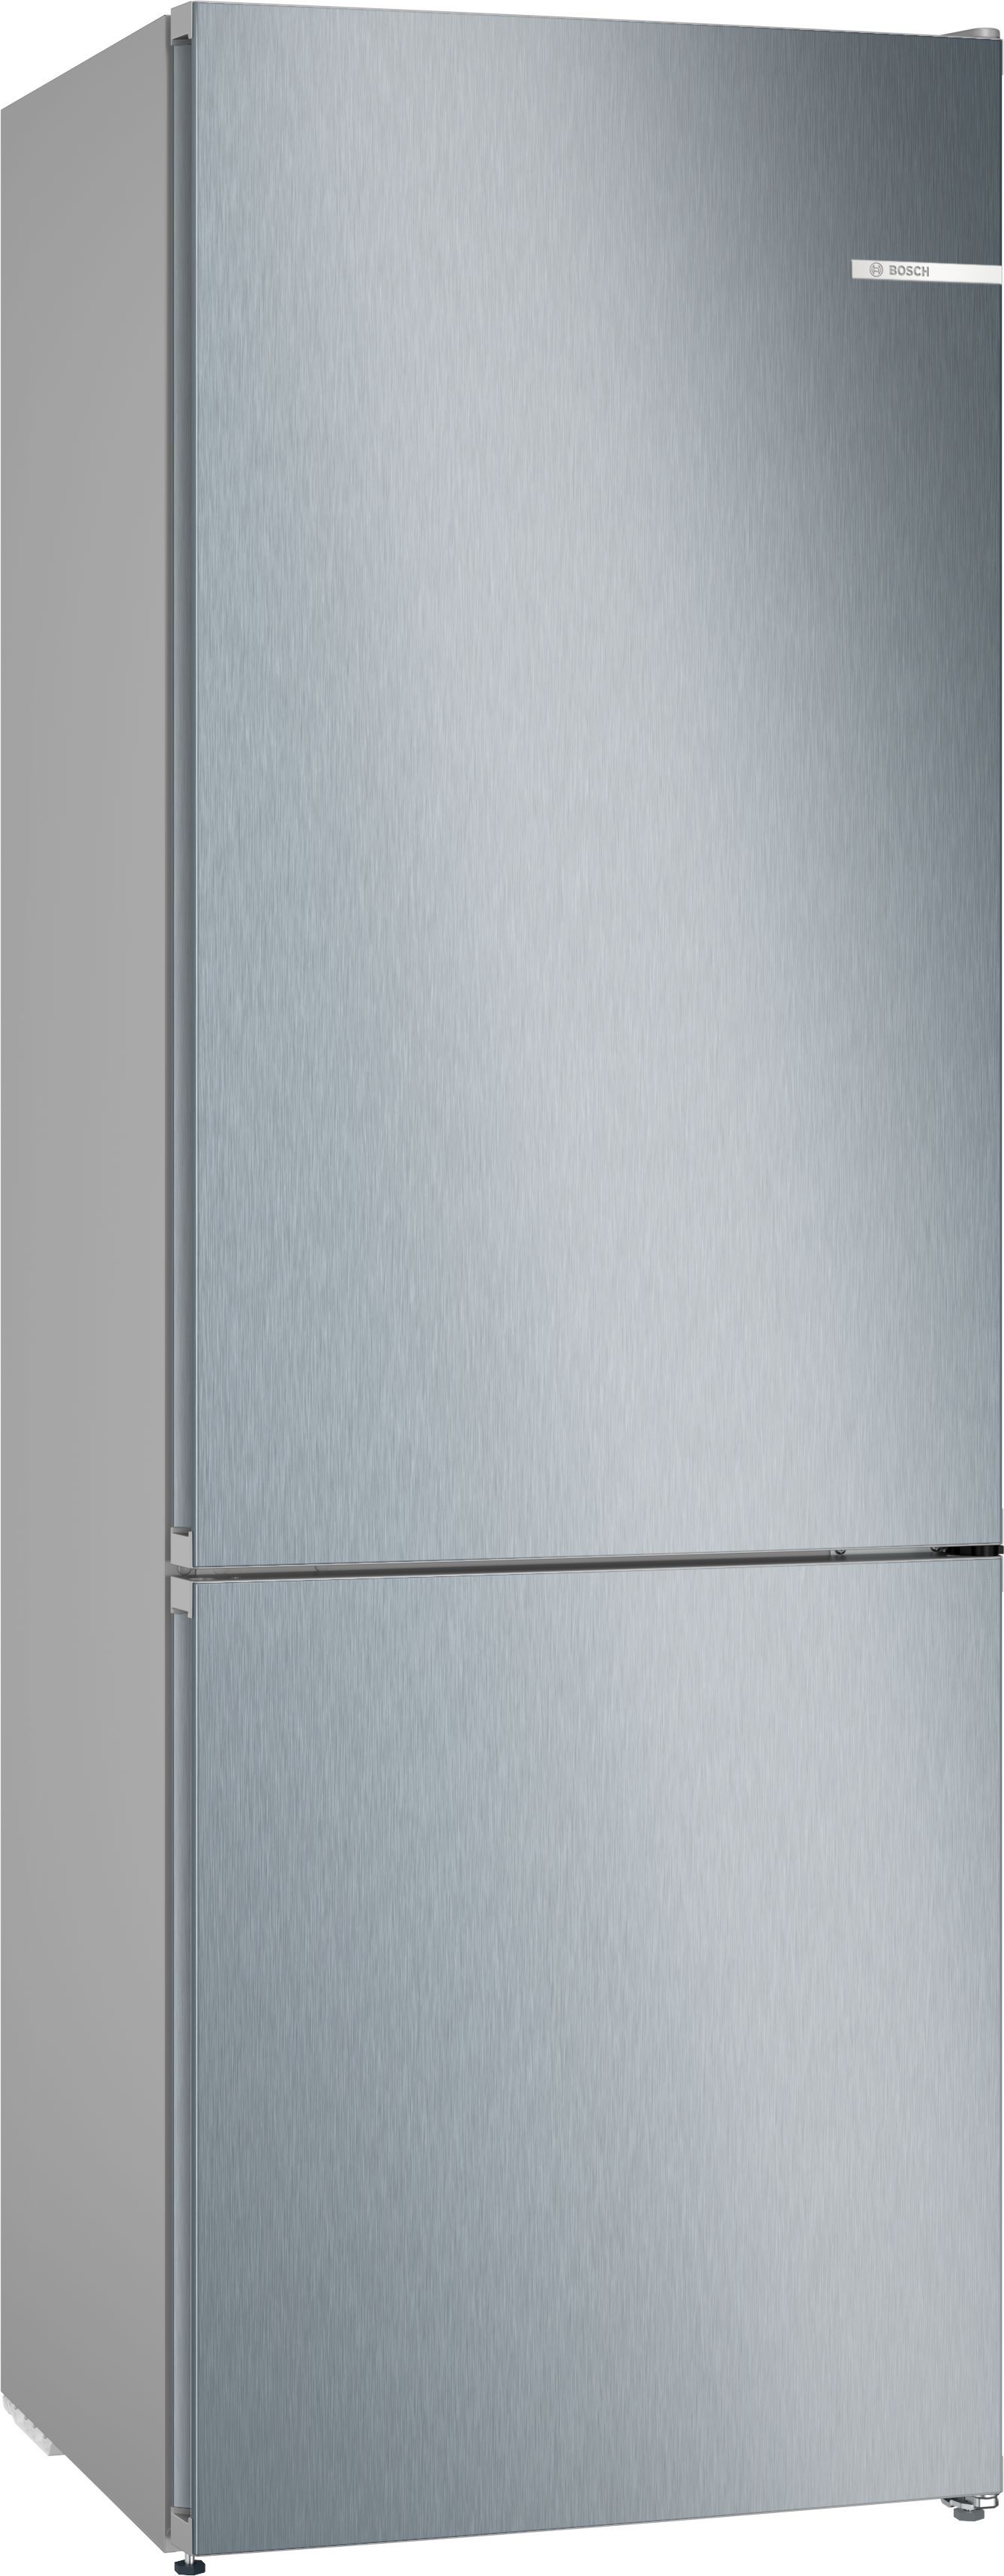 Bosch Series 4 KGN492LDFG 70/30 Frost Free Fridge Freezer - Stainless Steel Effect - D Rated, Stainless Steel